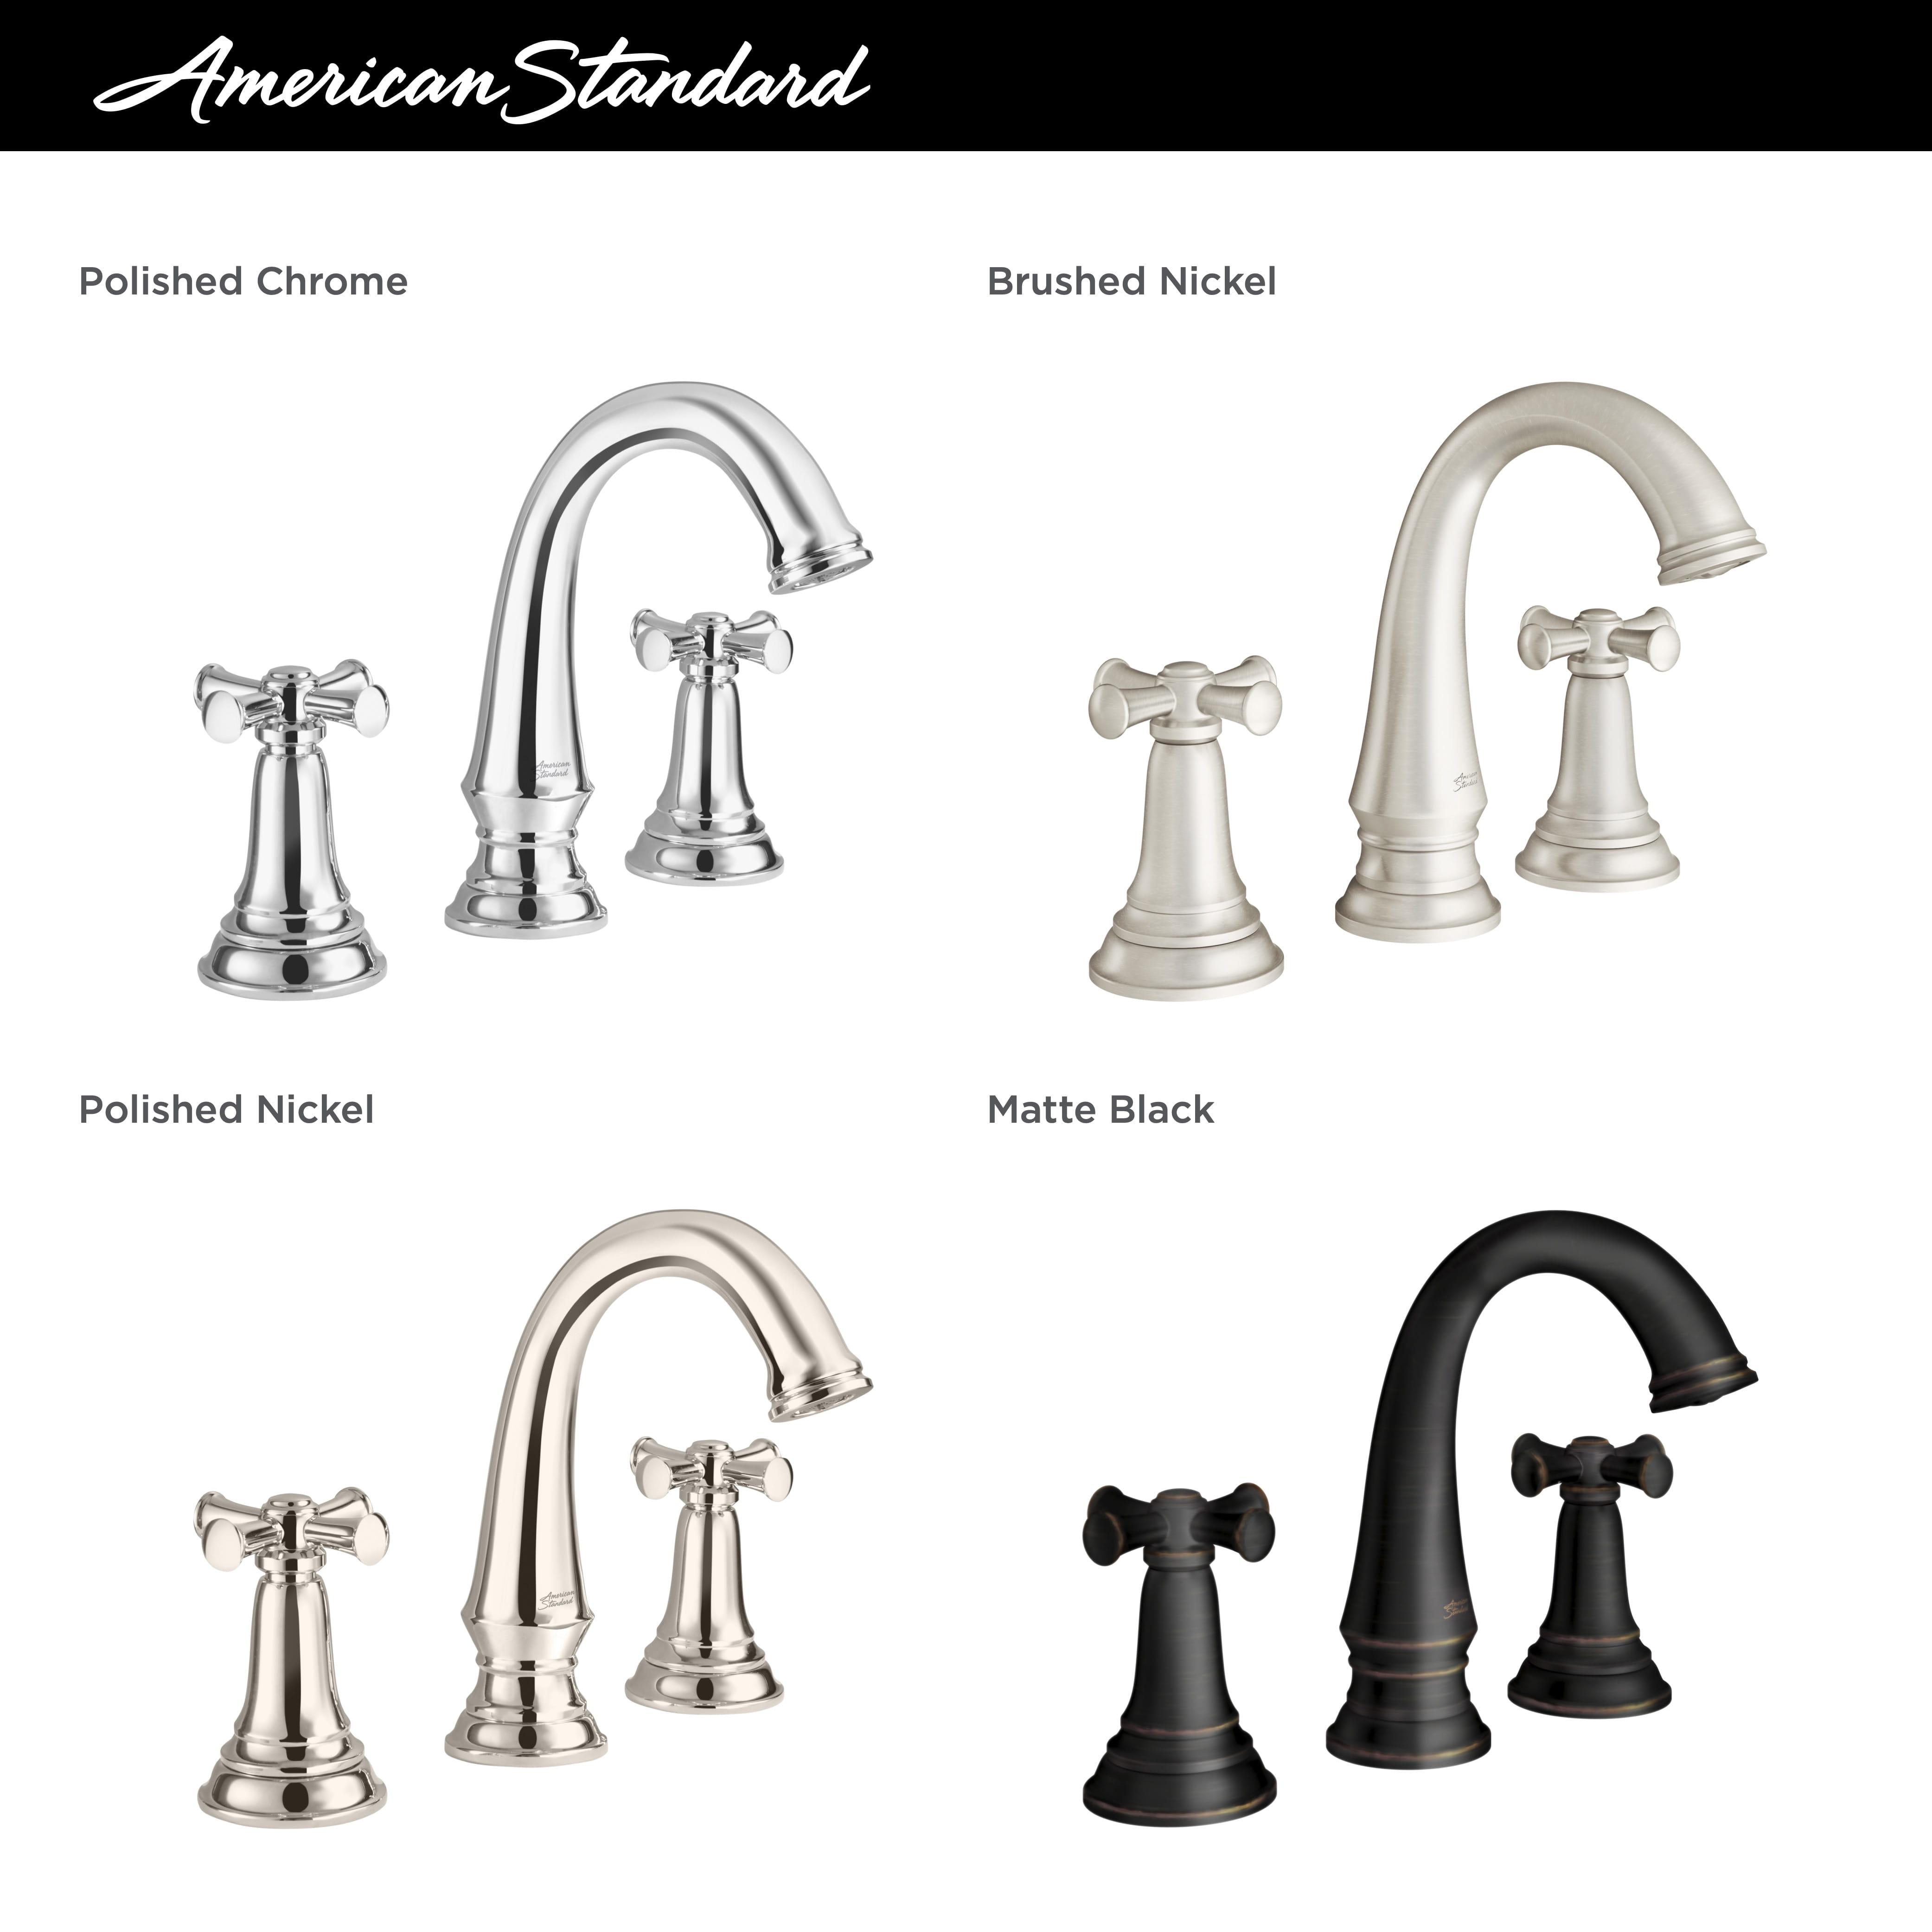 Delancey® 8-Inch Widespread 2-Handle Bathroom Faucet 1.2 gpm/4.5 L/min With Cross Handles